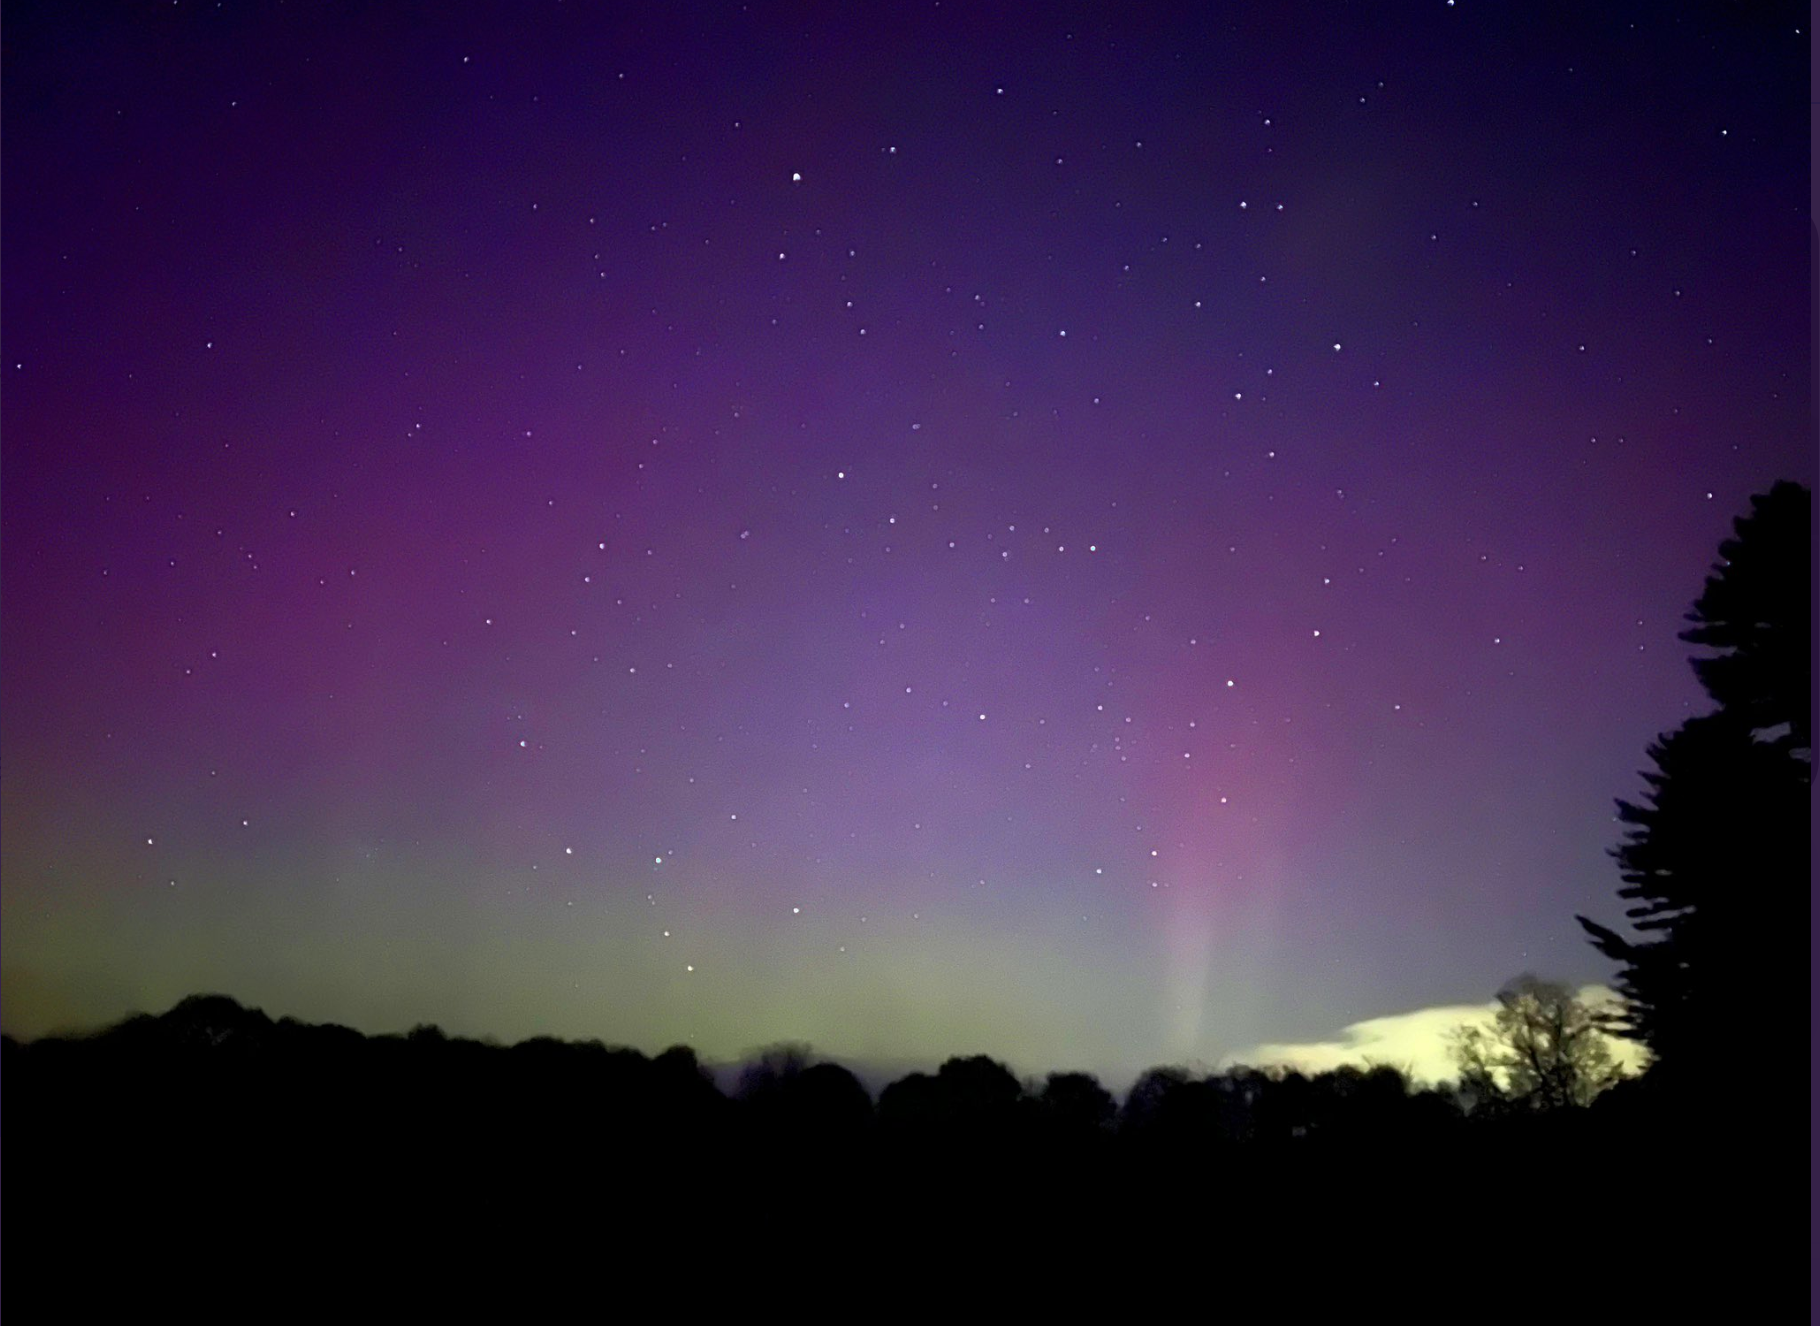 Aurora Borealis Could Dazzle the Northern U.S. This Week, Smart News